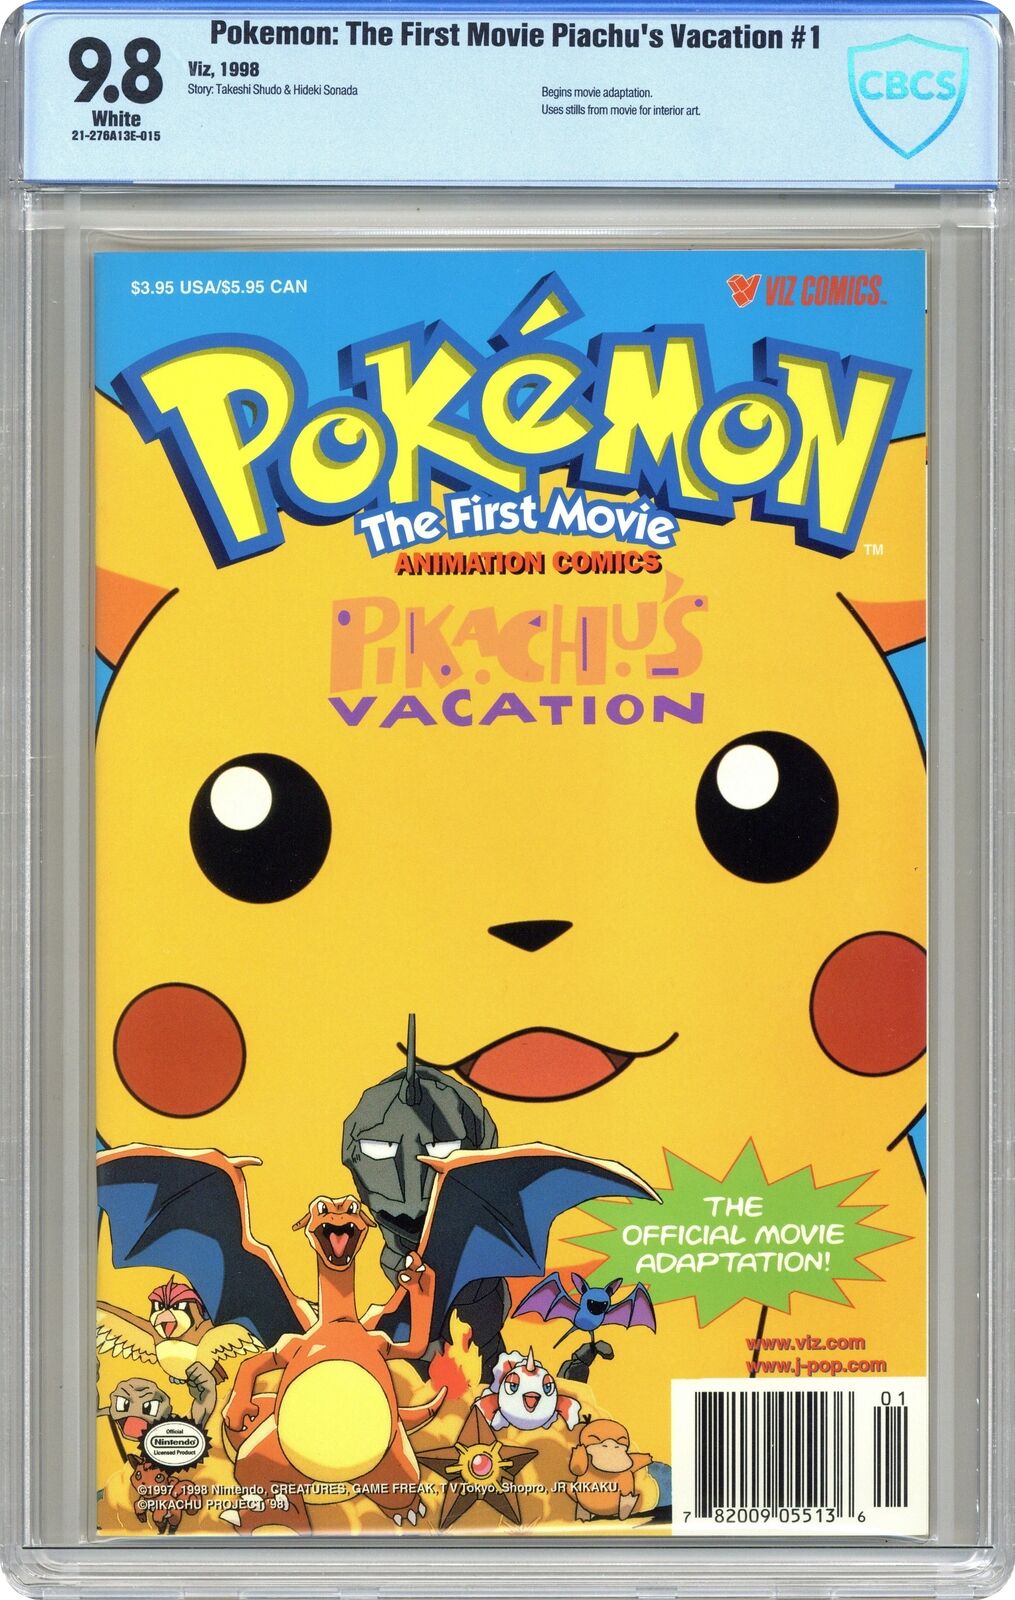 Pokemon The First Movie Pikachu's Vacation #1 1st Printing CBCS 9.8 1998